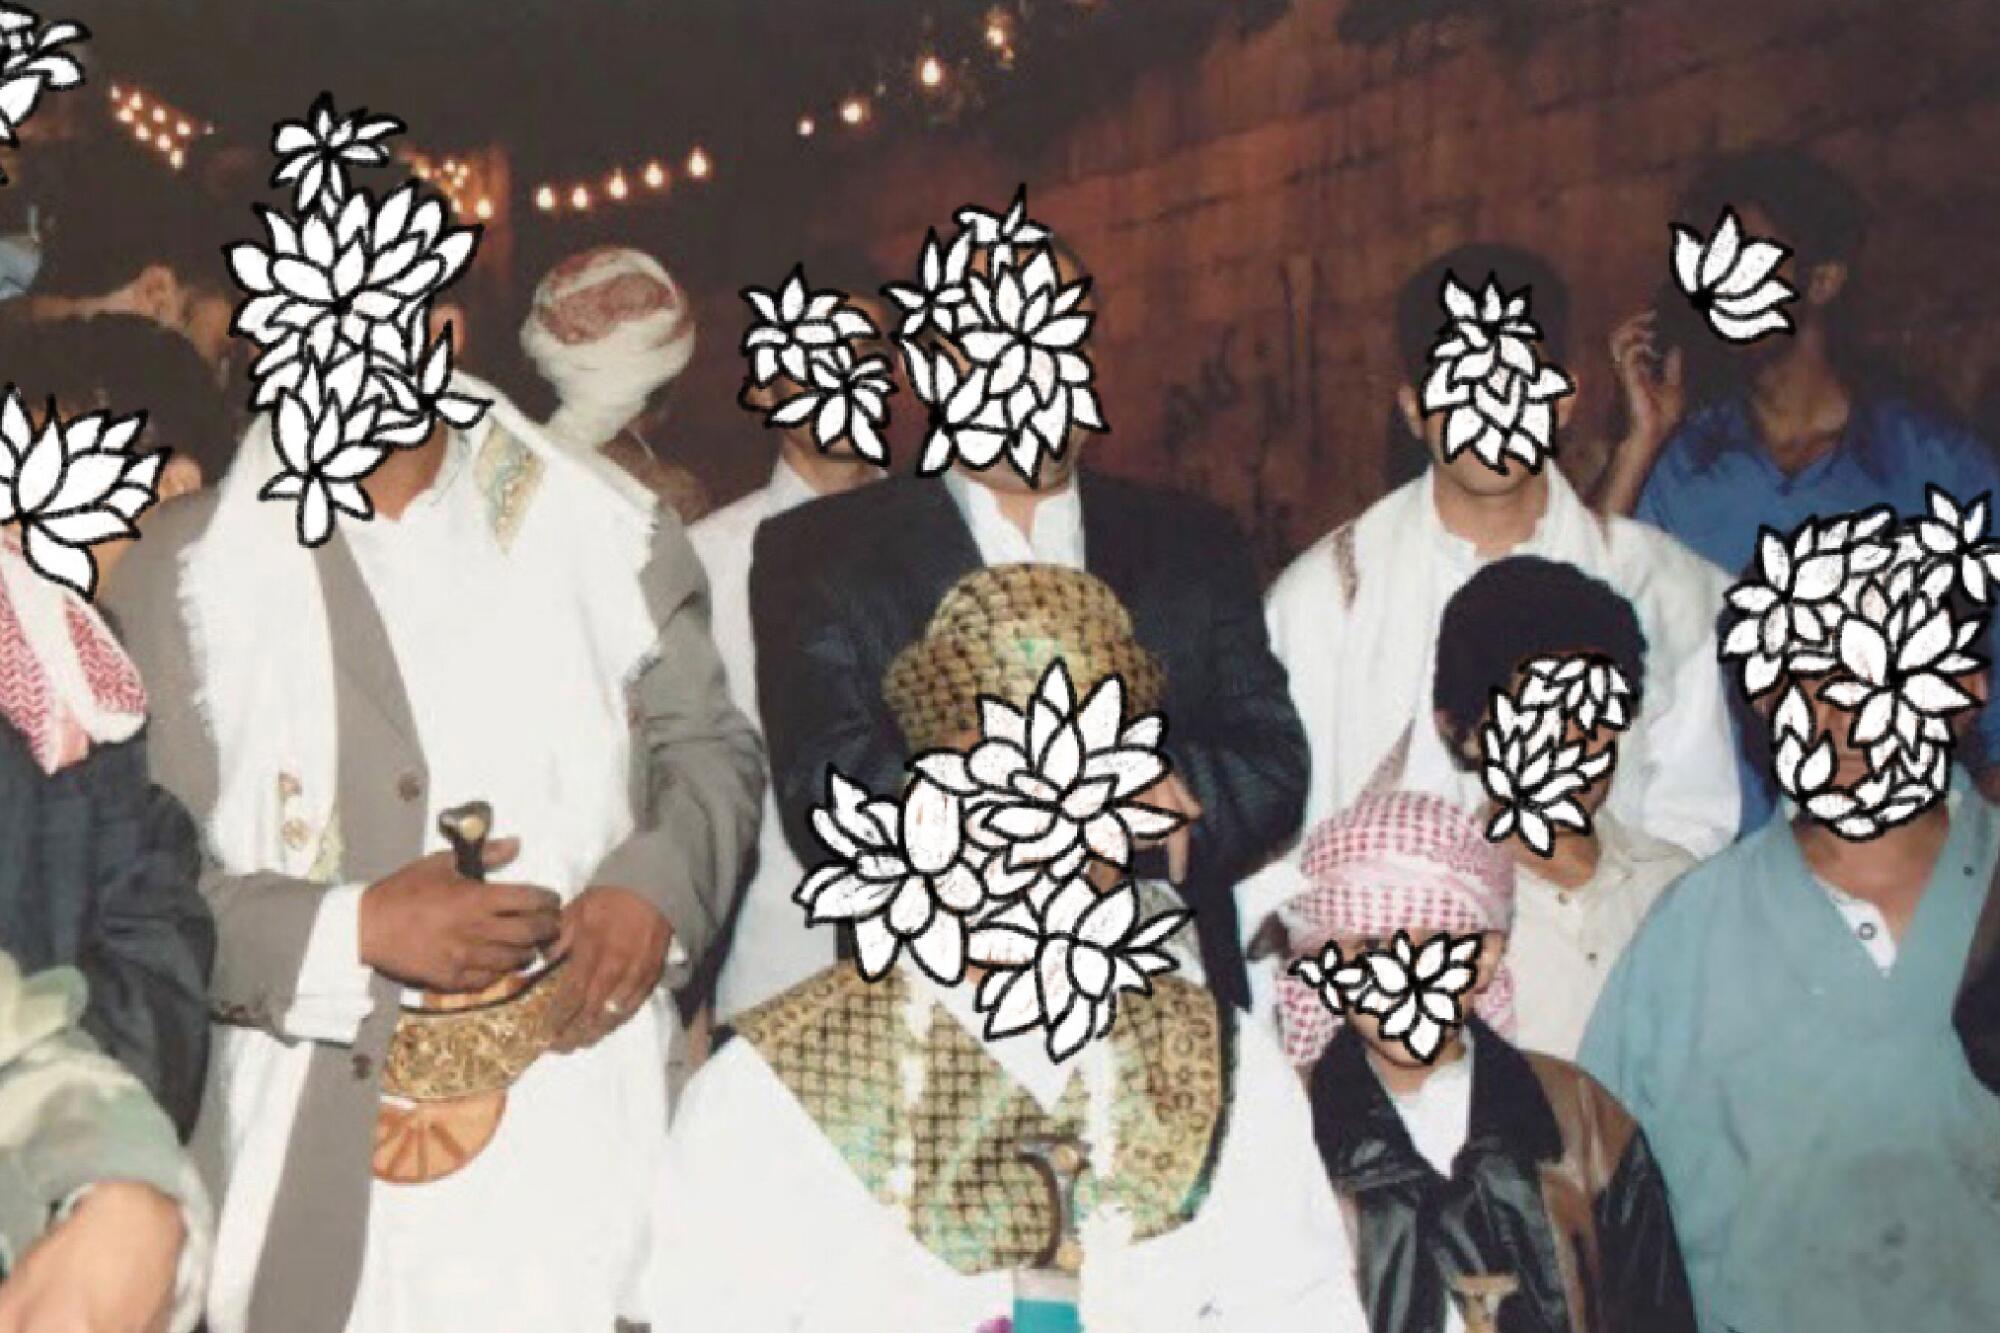 photo collage of a family group photo with illustrations of white flowers covering their faces